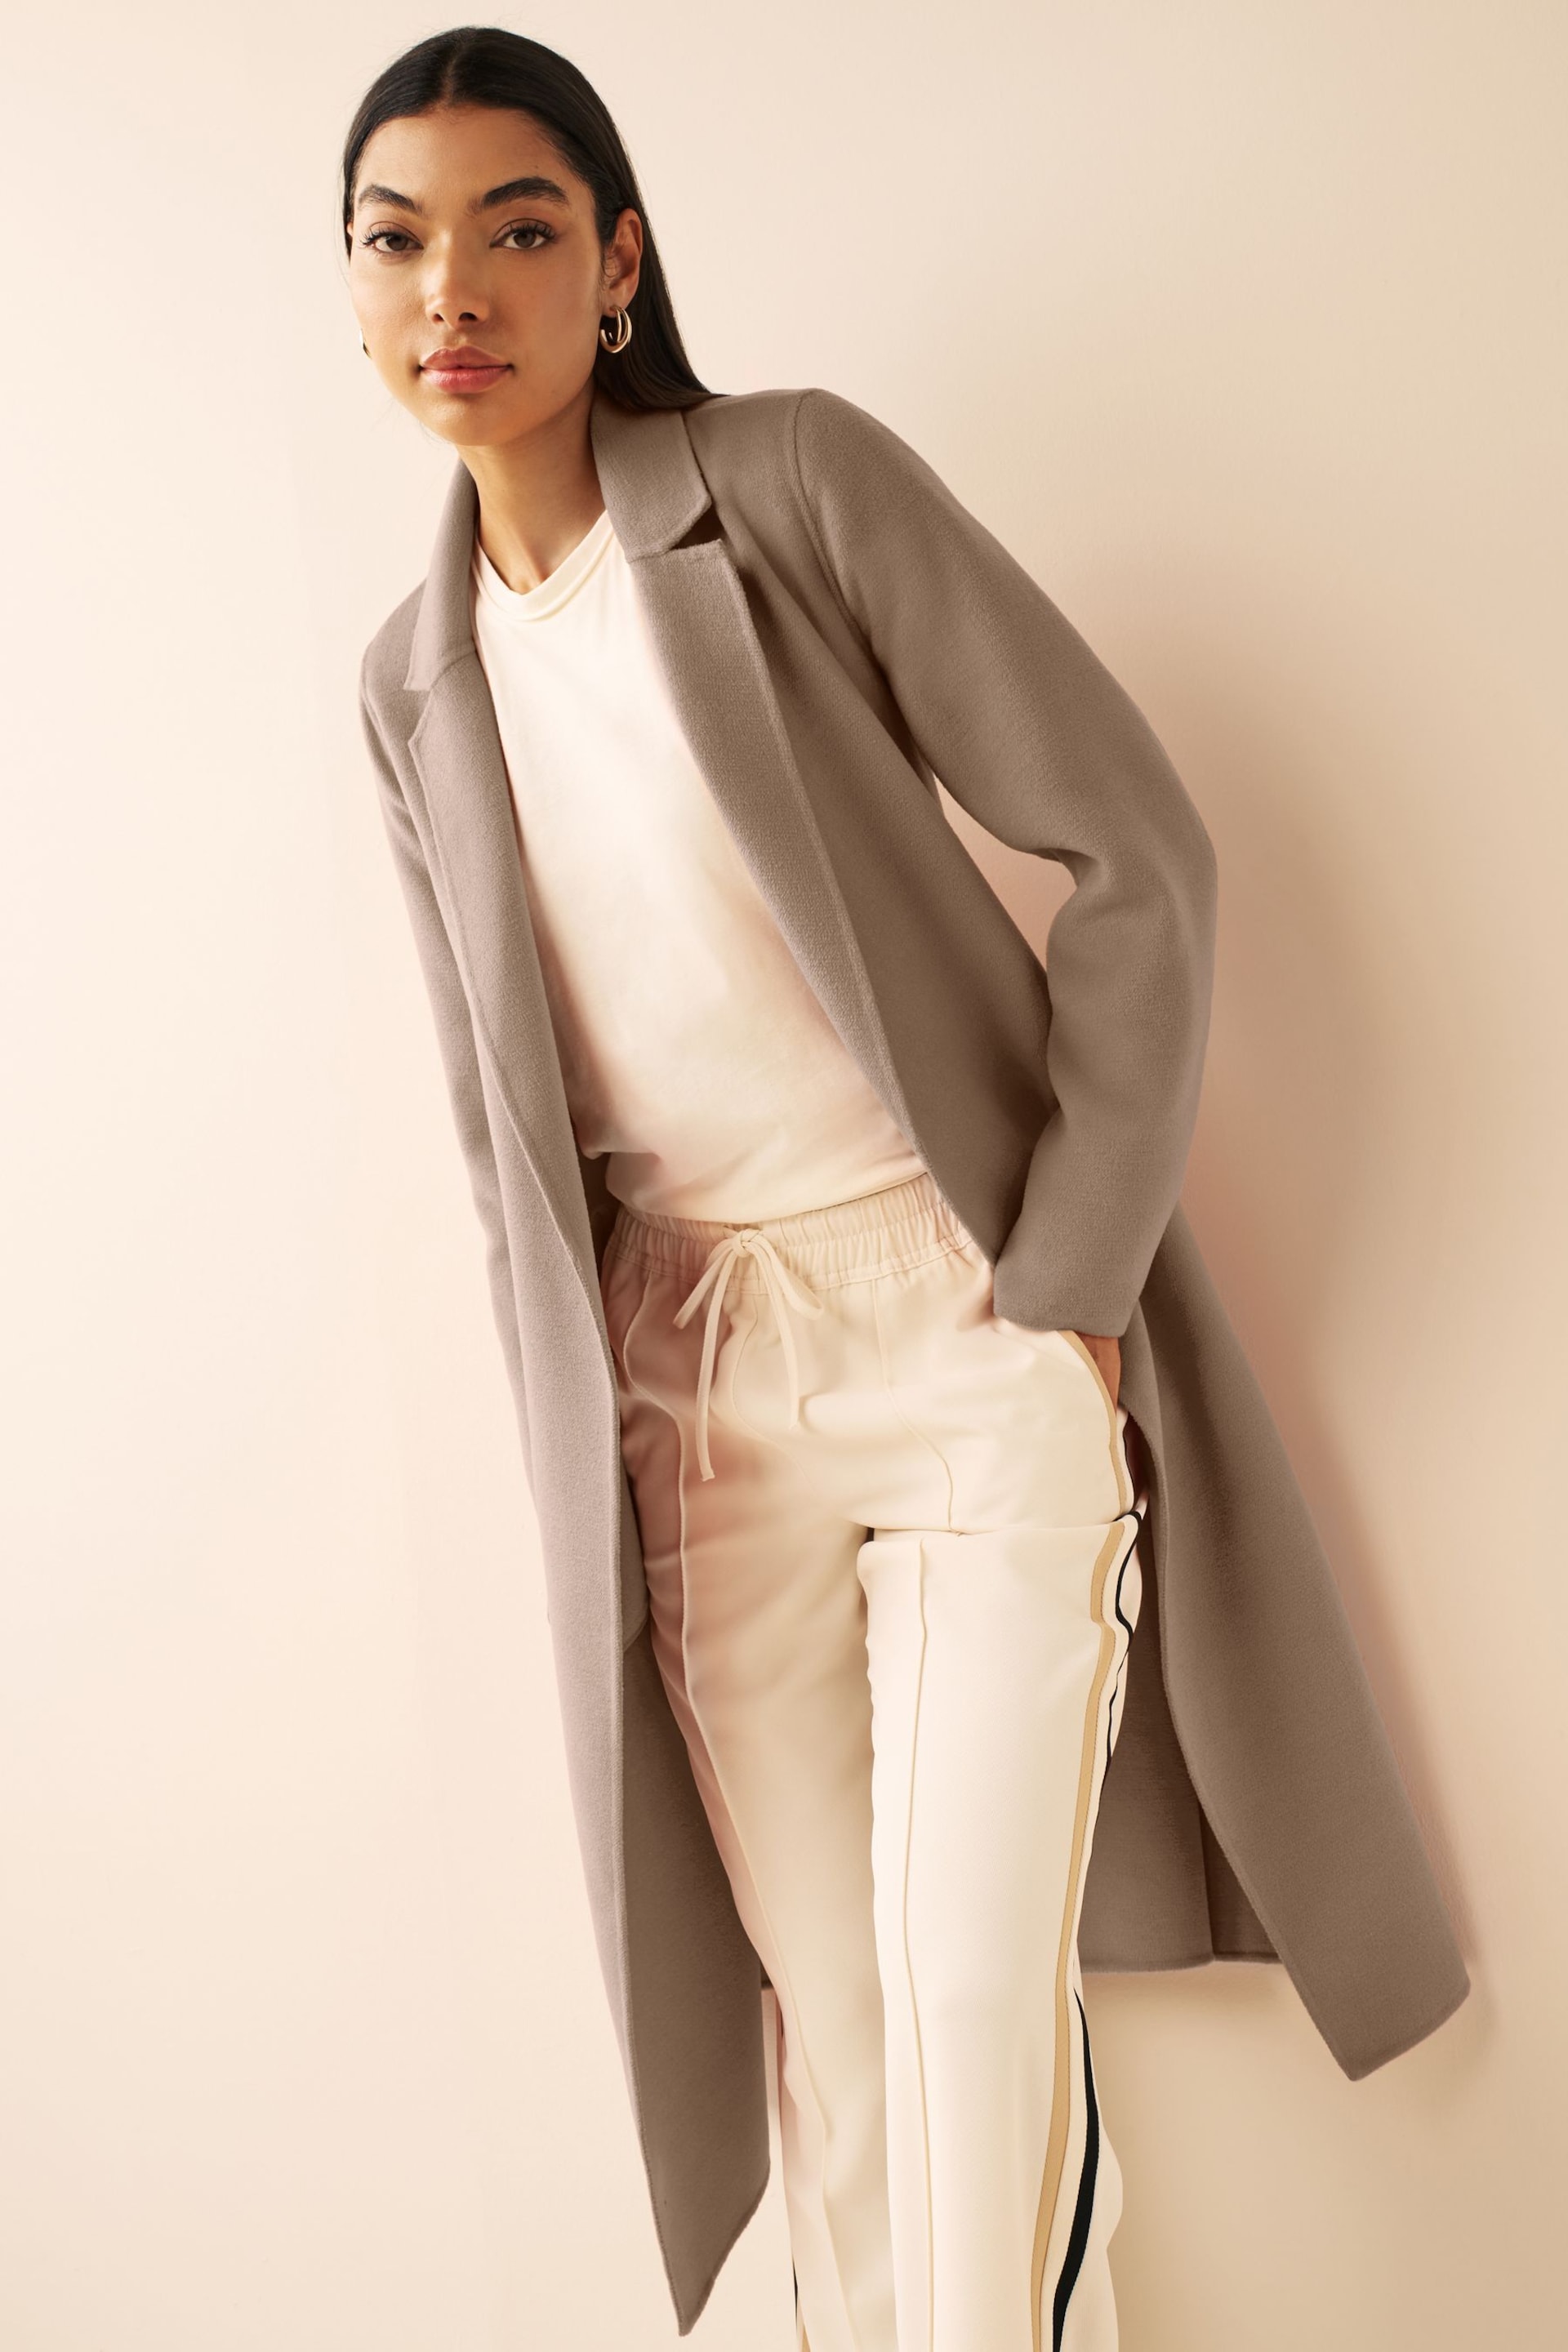 Emme by Marella Neutral Antonia Jersey Trench Coat - Image 1 of 6